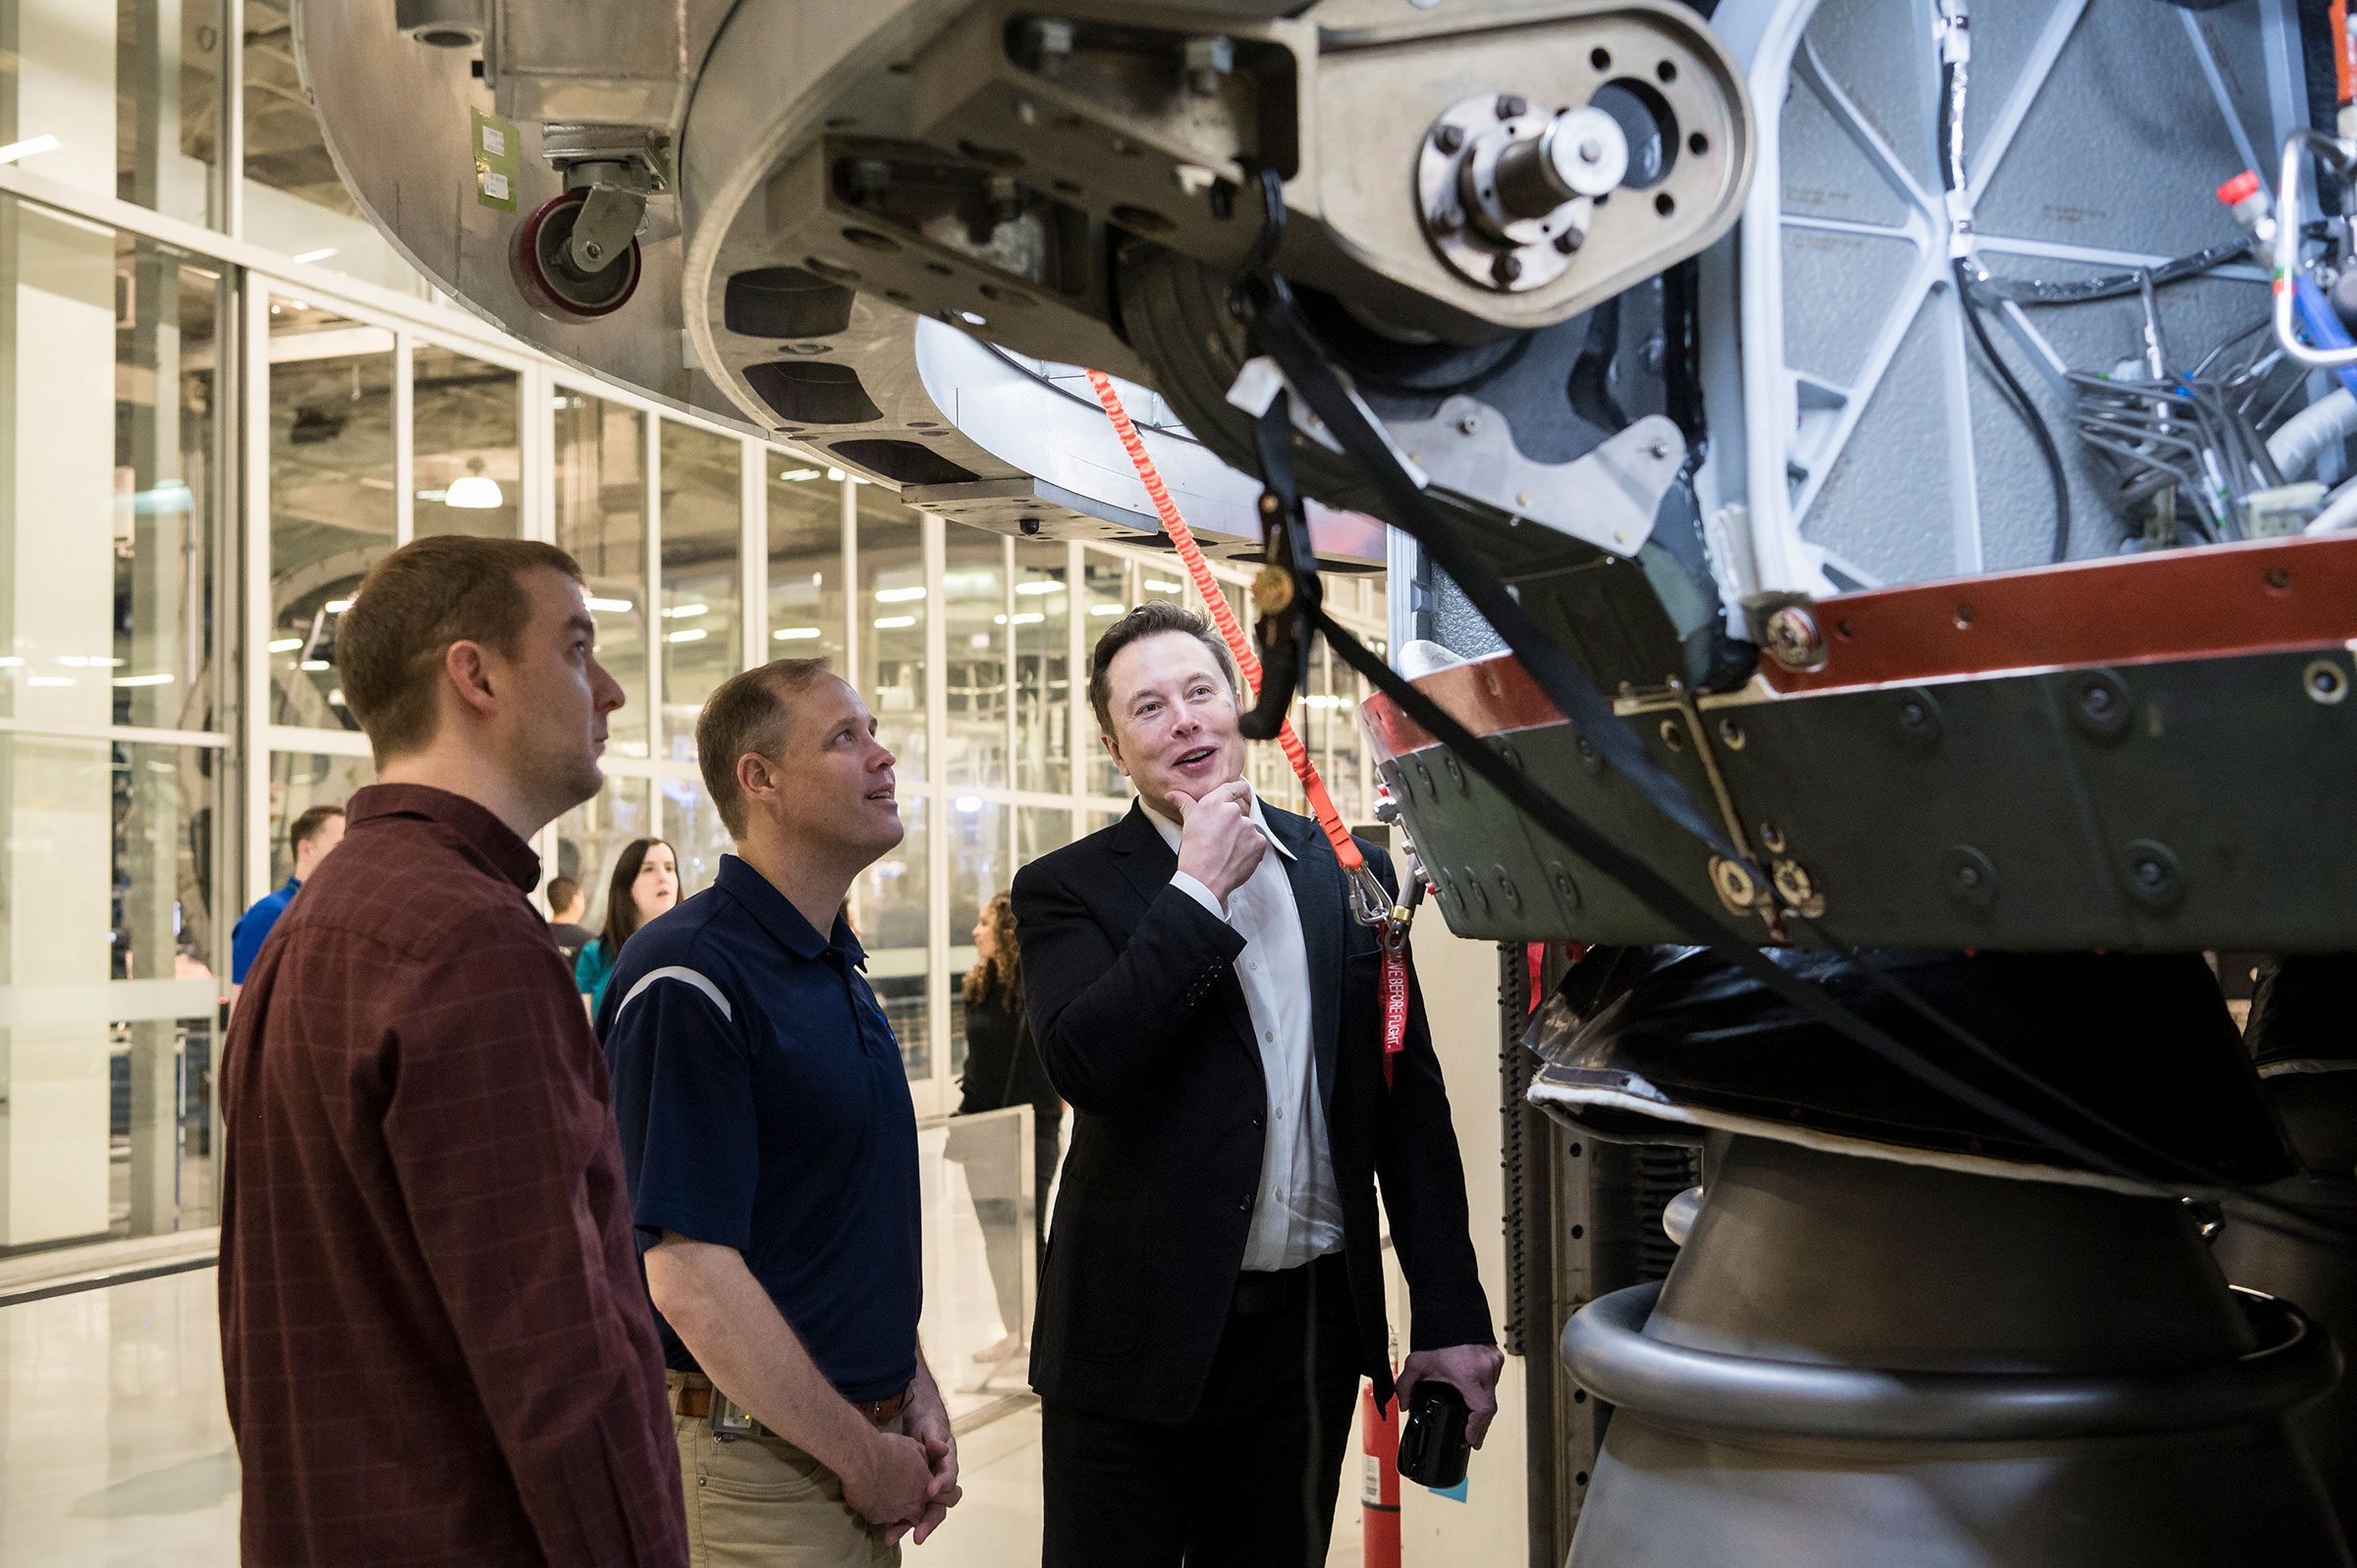 SpaceX Chief Engineer Elon Musk speaks with NASA Administrator Jim Bridenstine while viewing the OctaWeb, part of the Merlin engine used for the Falcon rockets, at the SpaceX Headquarters, in Hawthorne, Calif. on Oct. 10, 2019. (Aubrey Gemignani—NASA/Getty Images)